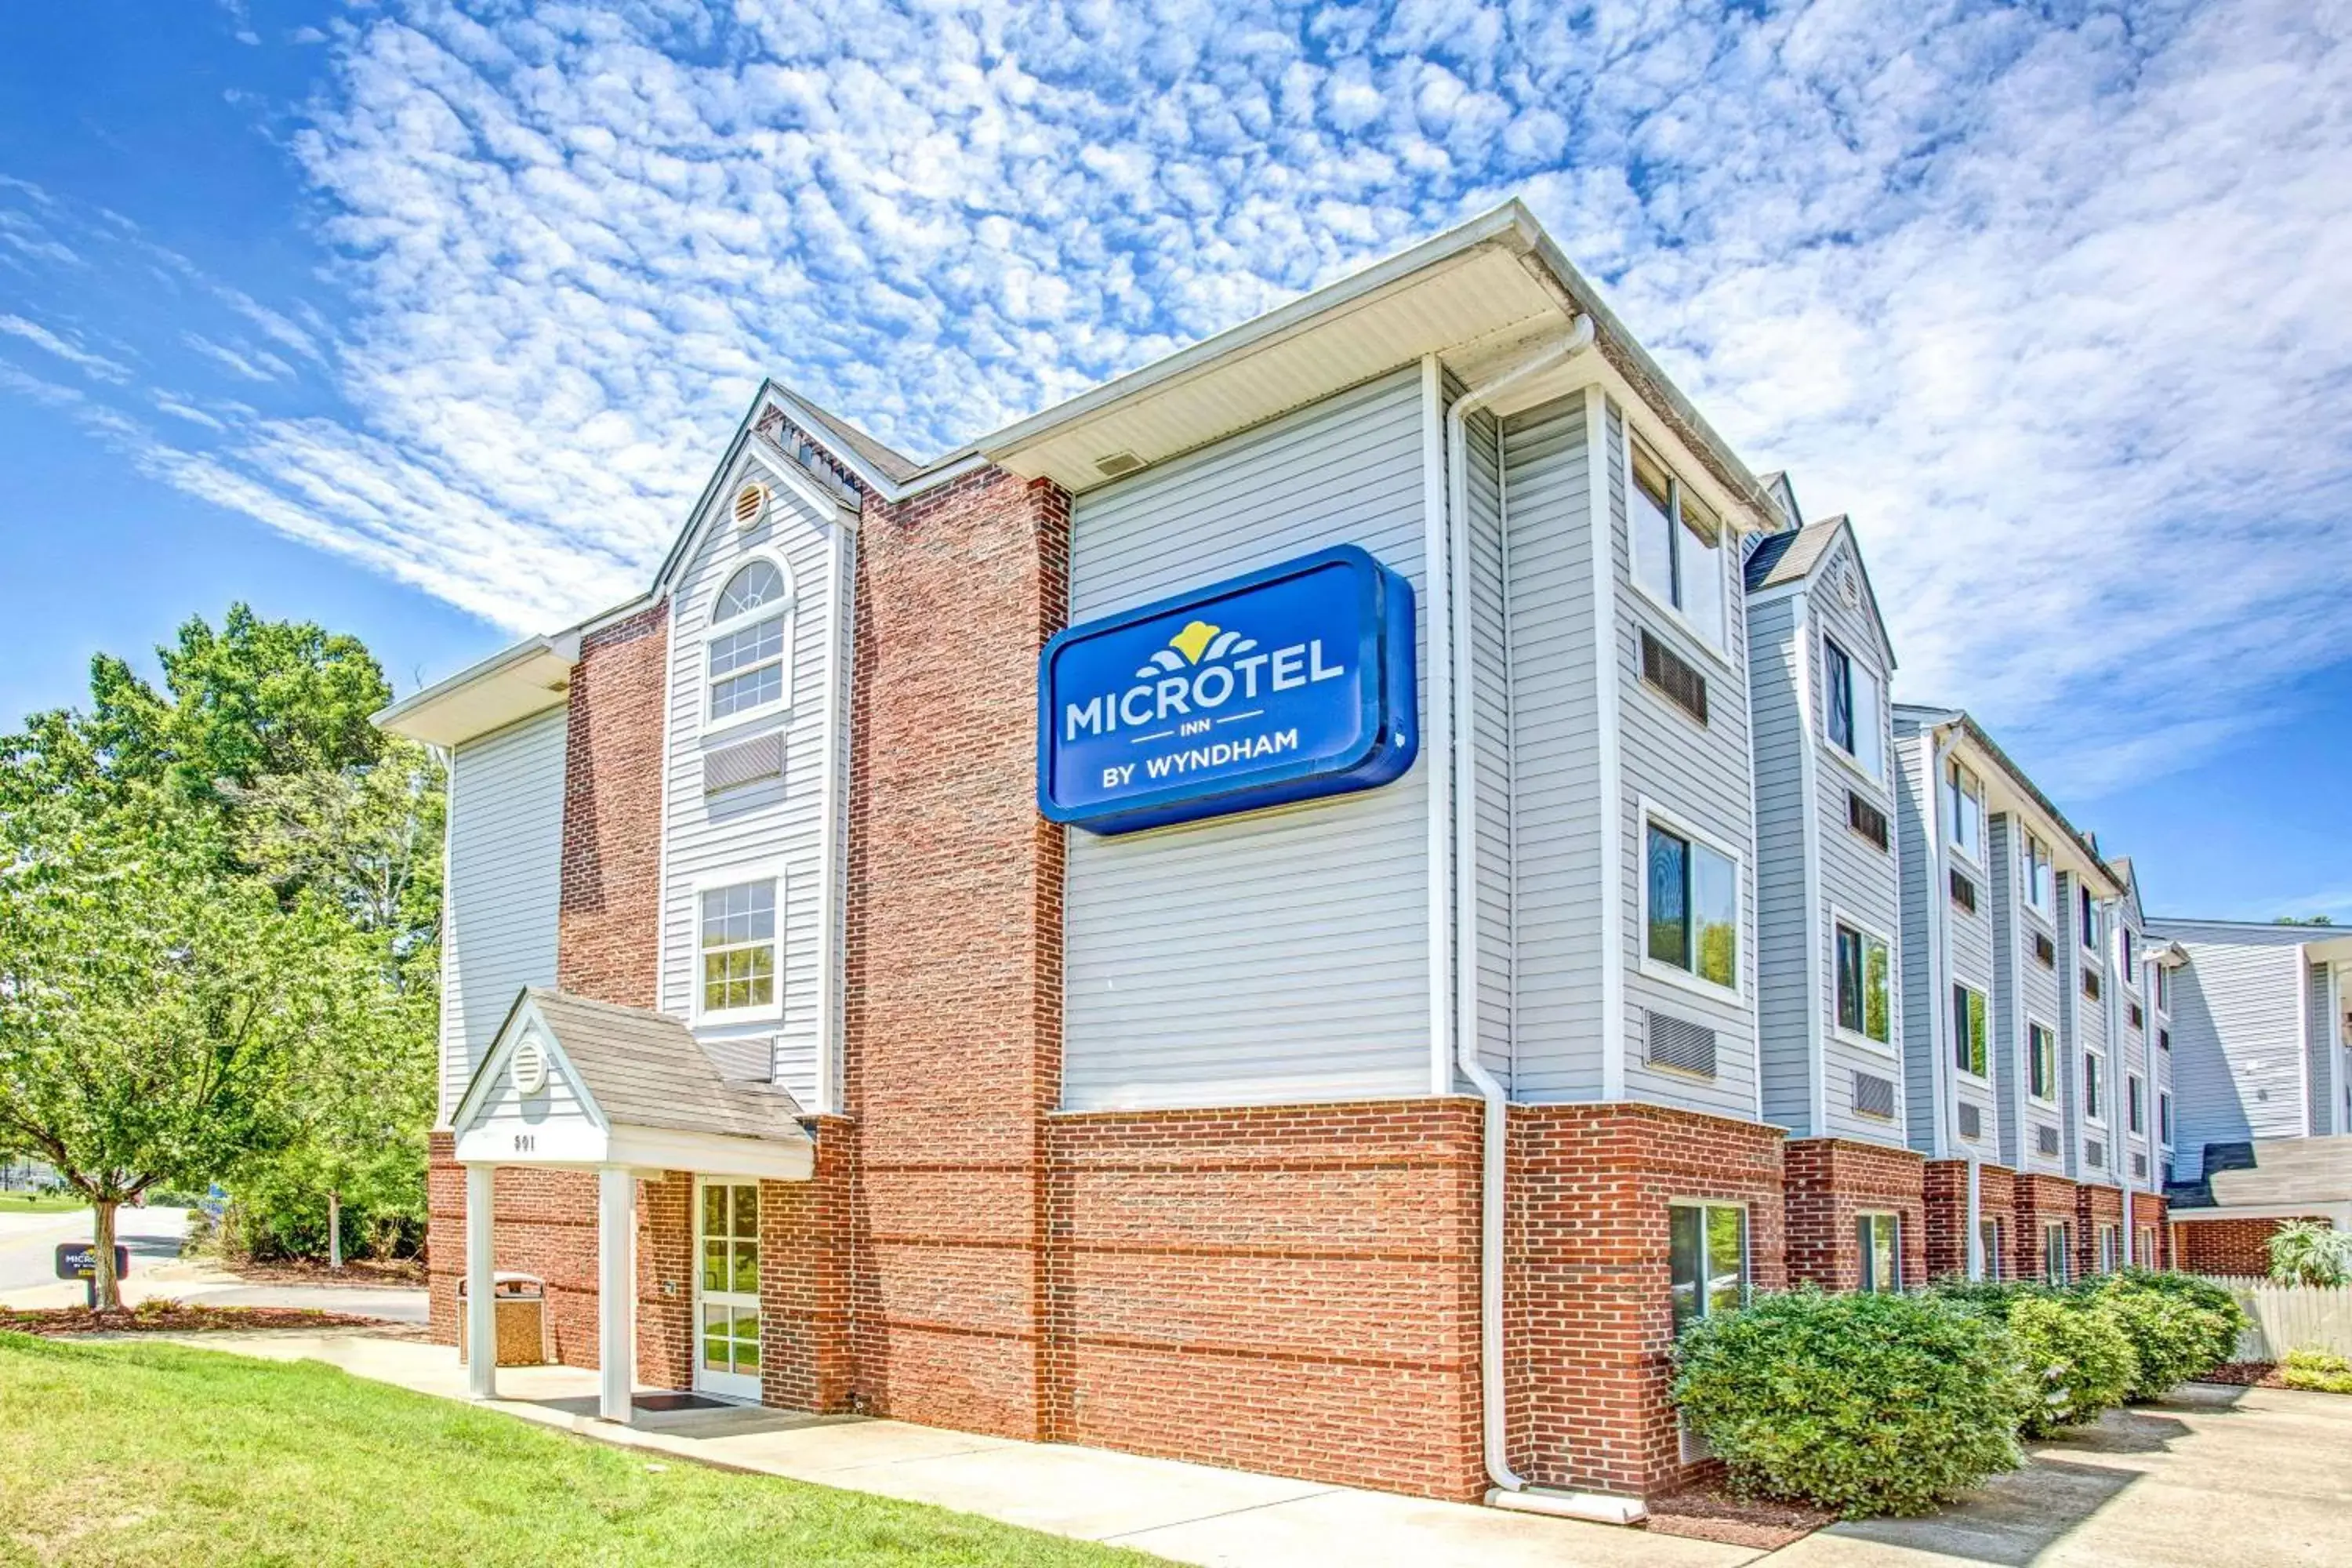 Property Building in Microtel Inn & Suites Newport News